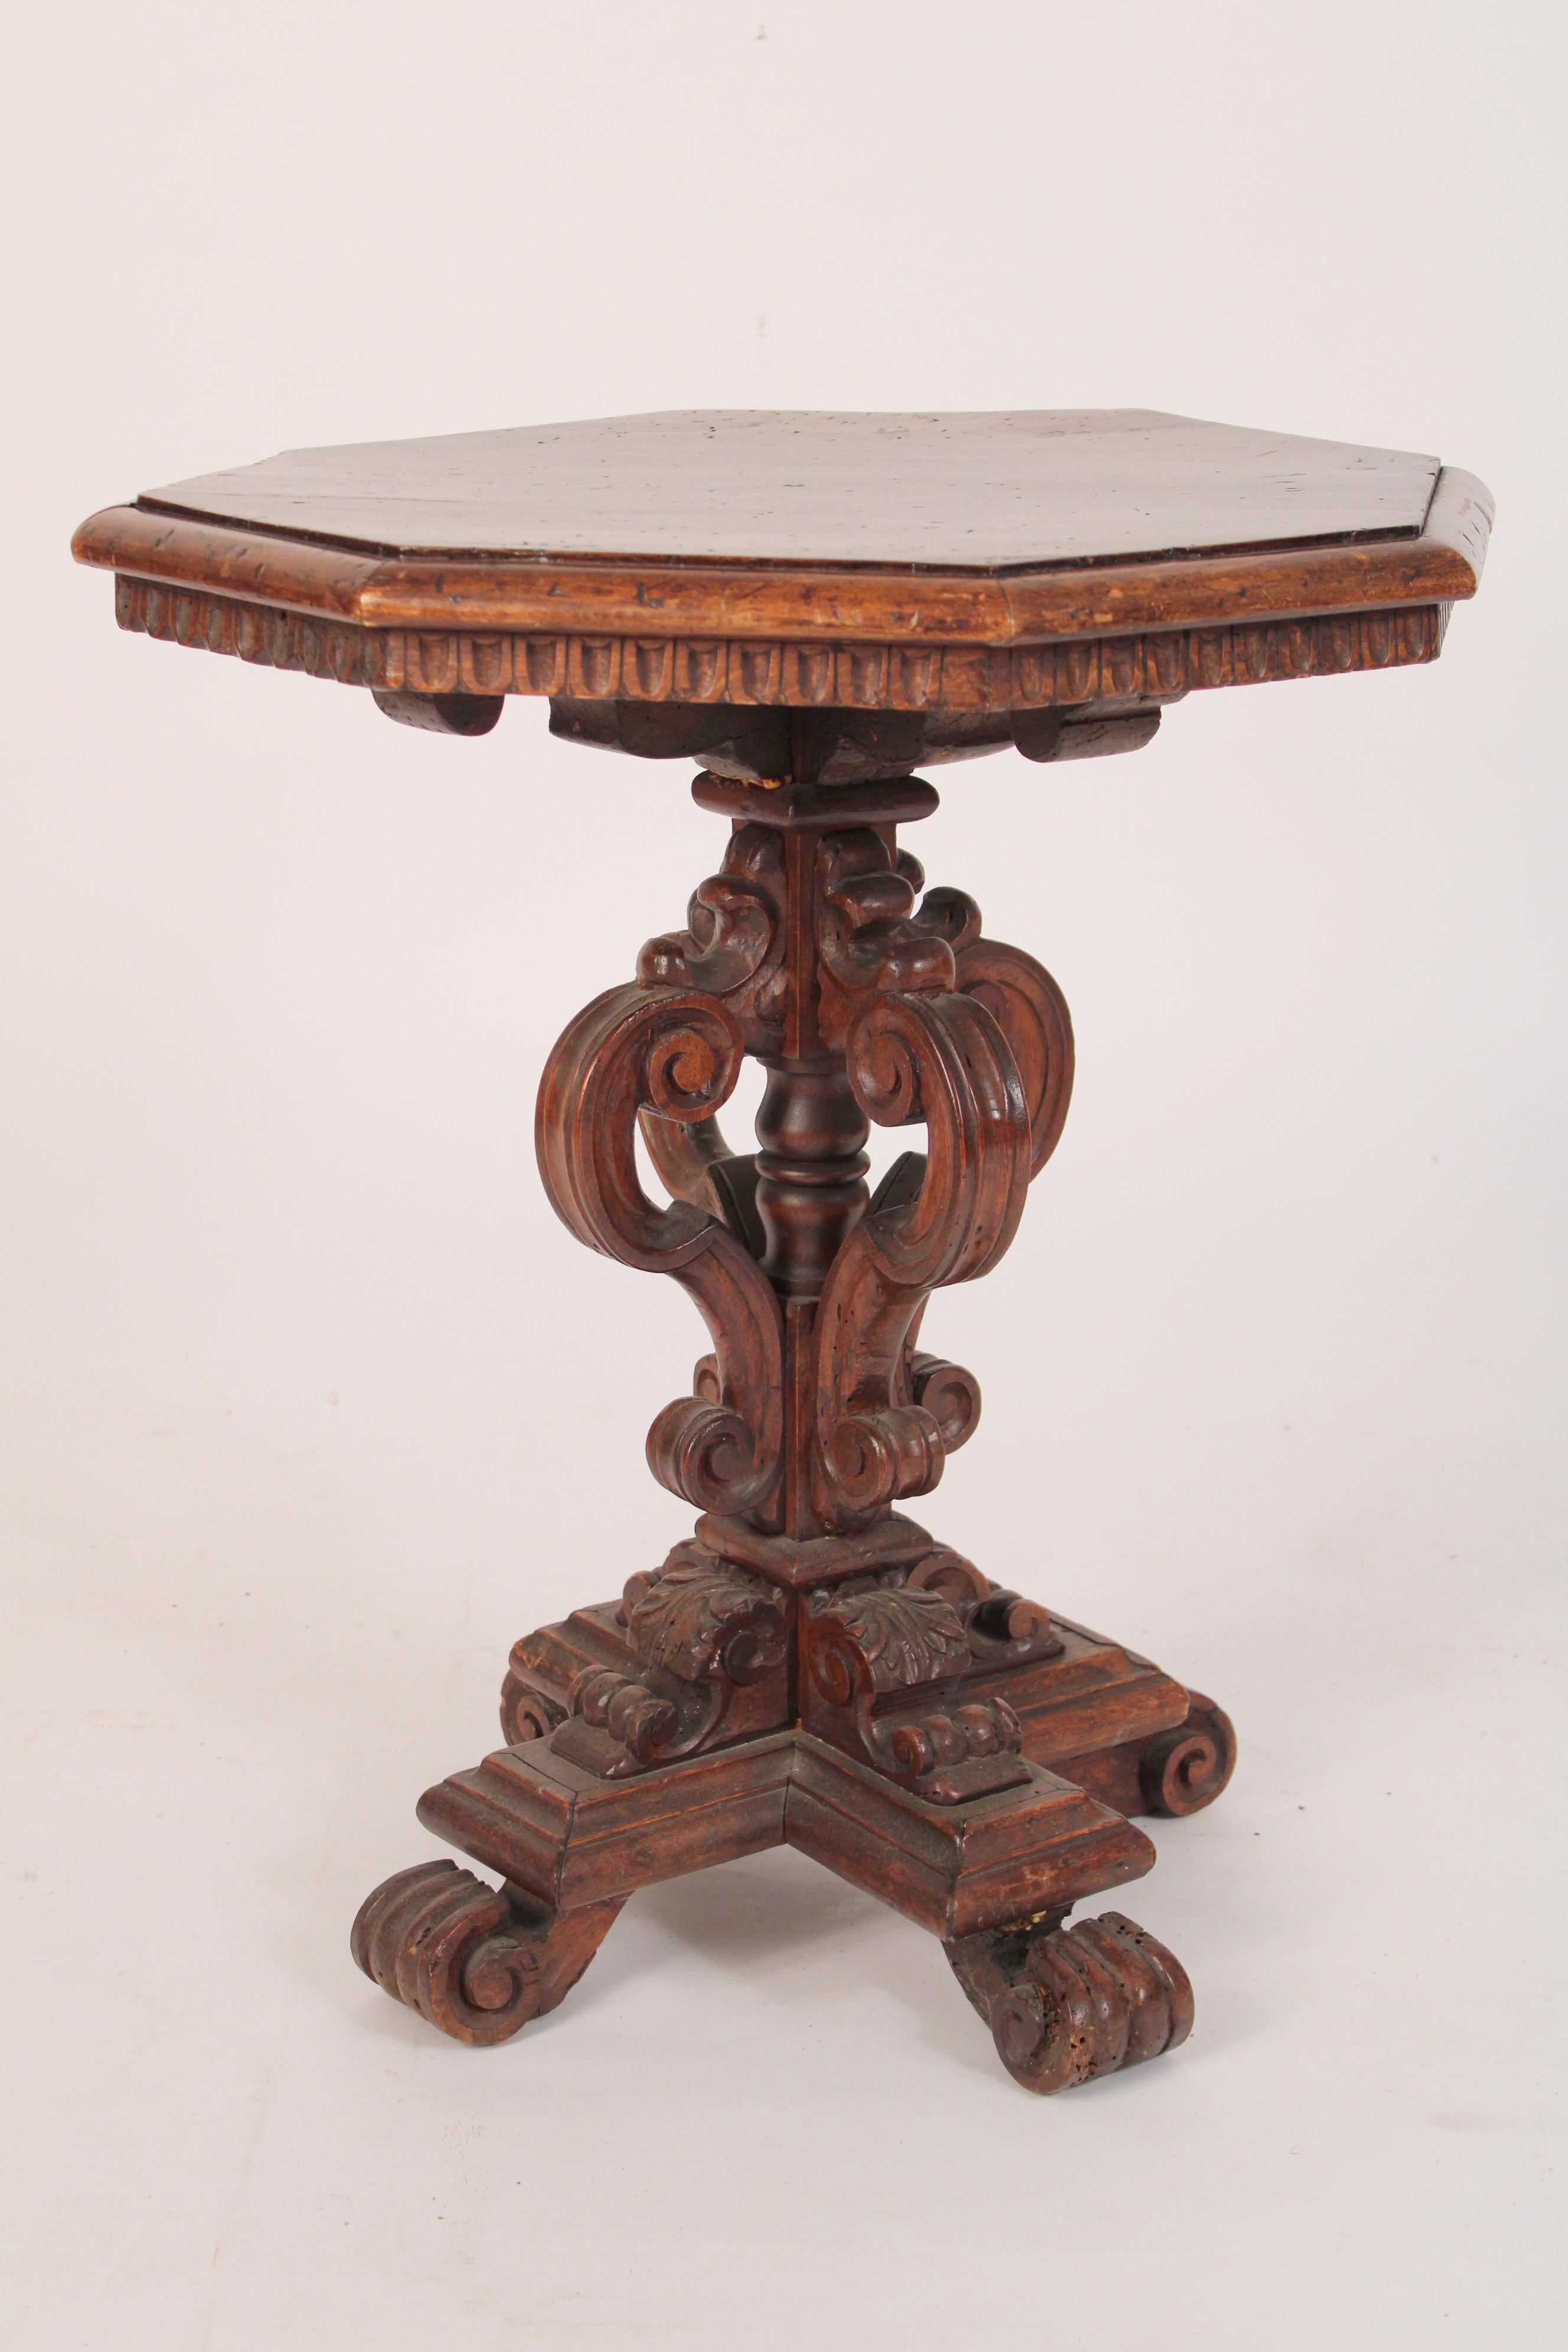 Italian baroque style walnut occasional table, made from antique and later elements, assembled circa 1920's. With an octagonal top with molded borders, S scroll pedestal supports resting on a 4 prong base, with scroll feet.